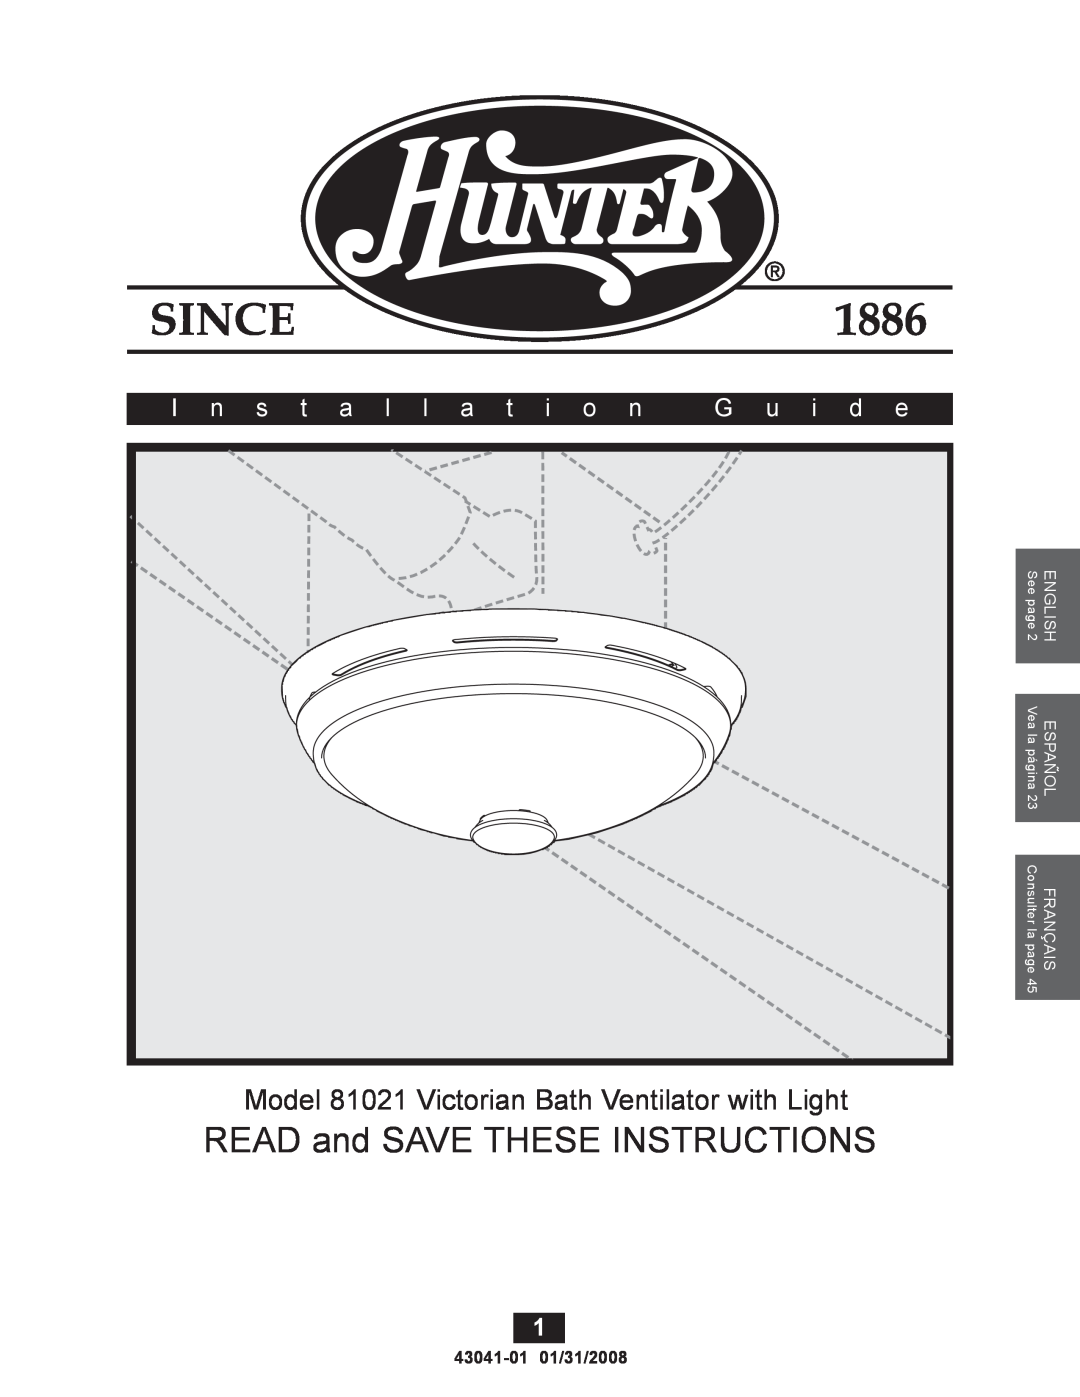 Hunter Fan 43041-01 manual READ and SAVE THESE INSTRUCTIONS, Model 81021 Victorian Bath Ventilator with Light, G u i d e 